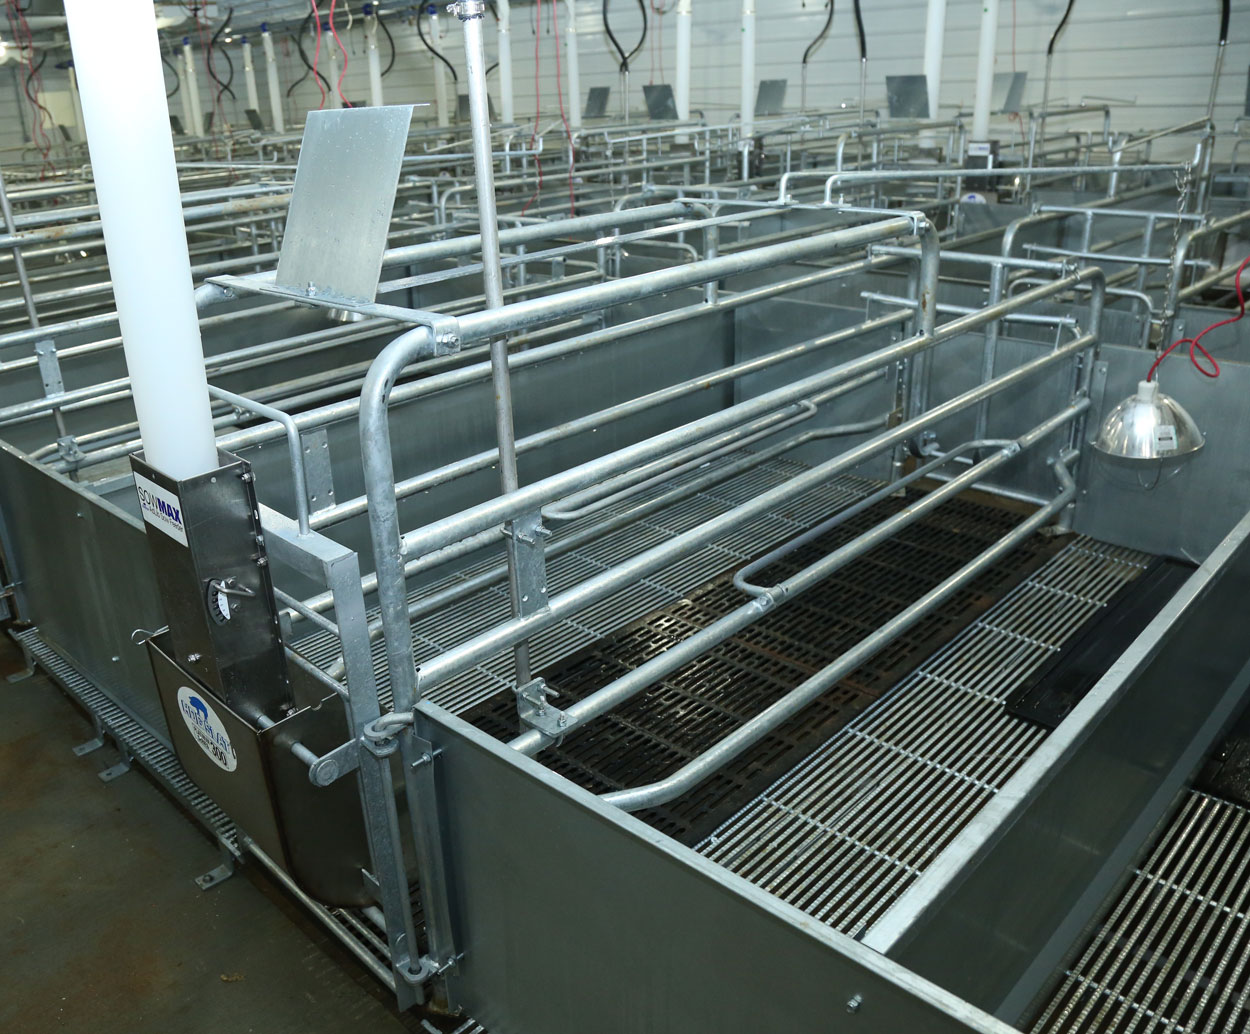 Hog Slat Ultimate farrowing crate installed in a new construction farrowing barn. The hot-dipped galvanized finish provides superior corrosion resistance, and the TriDek/Cast Iron flooring combination creates a cool floor environment for the sow and improved traction for young pigs moving around the creep area. (Also shown: Hog Slat galvanized creep panels, SowMAX ad-lib sow feeder and Hog Slat Platinum Series 300 stainless steel small sow bowl feeder)